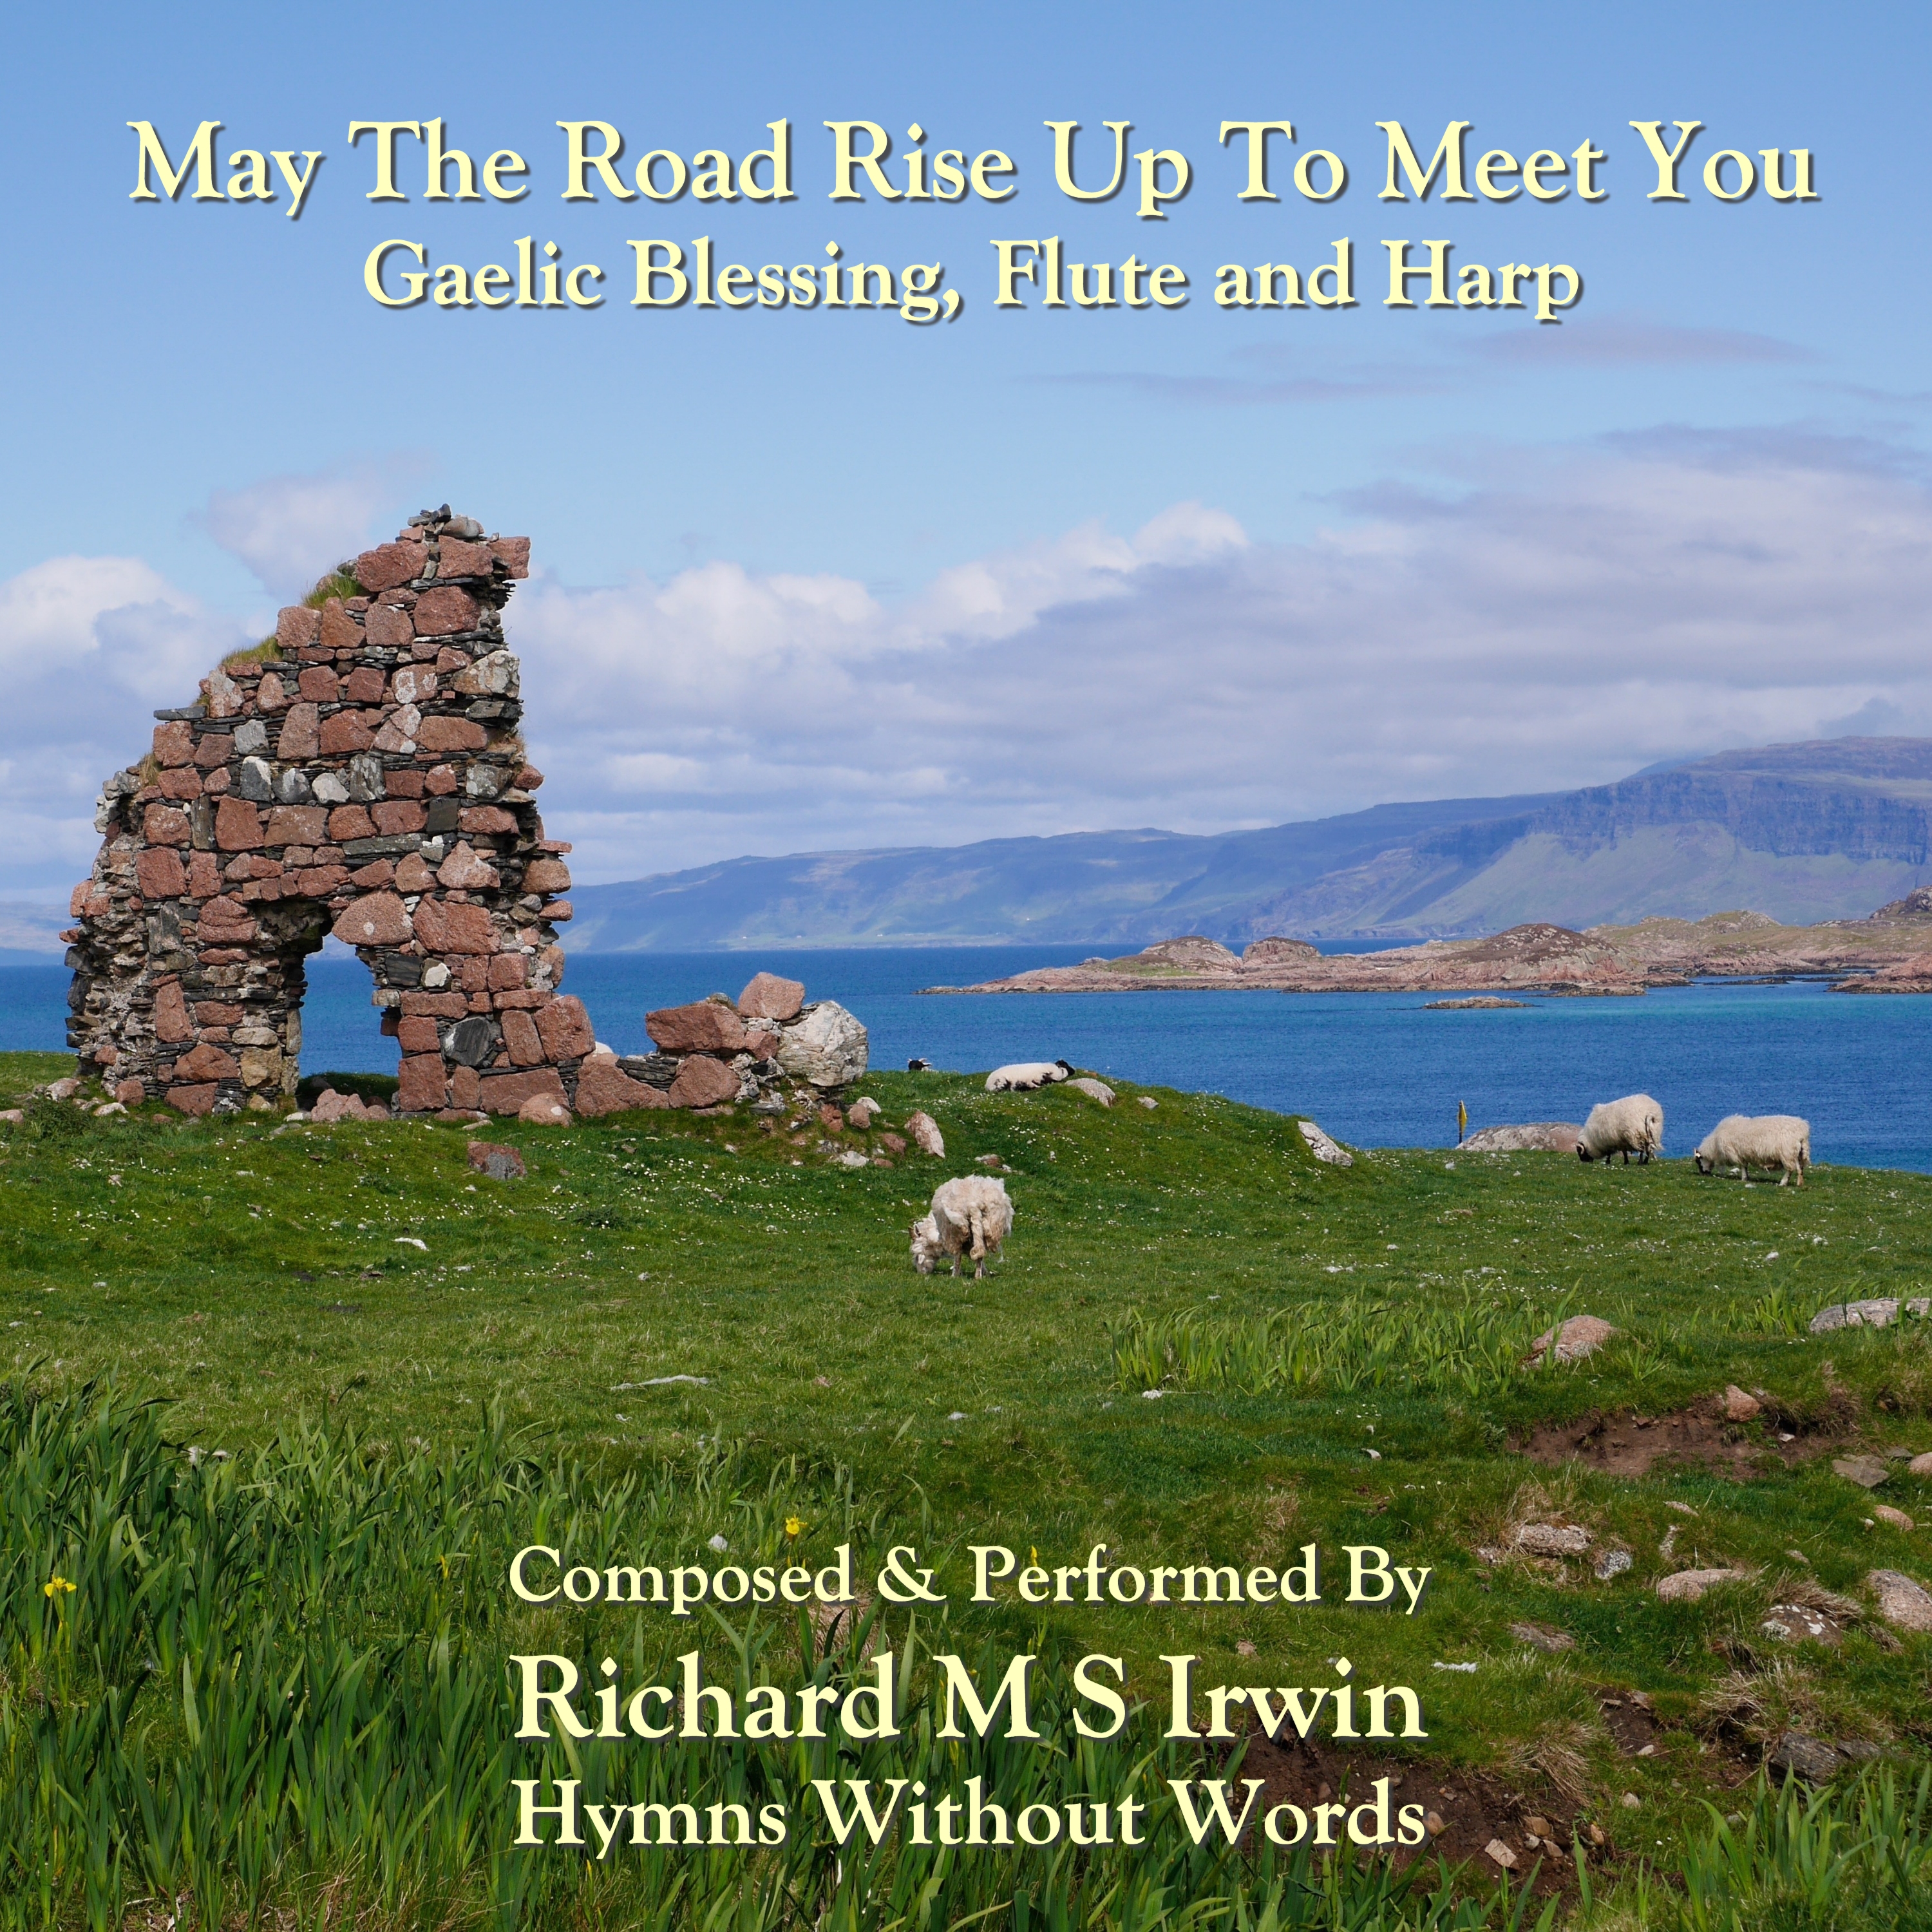 May The Road Rise Up To Meet You